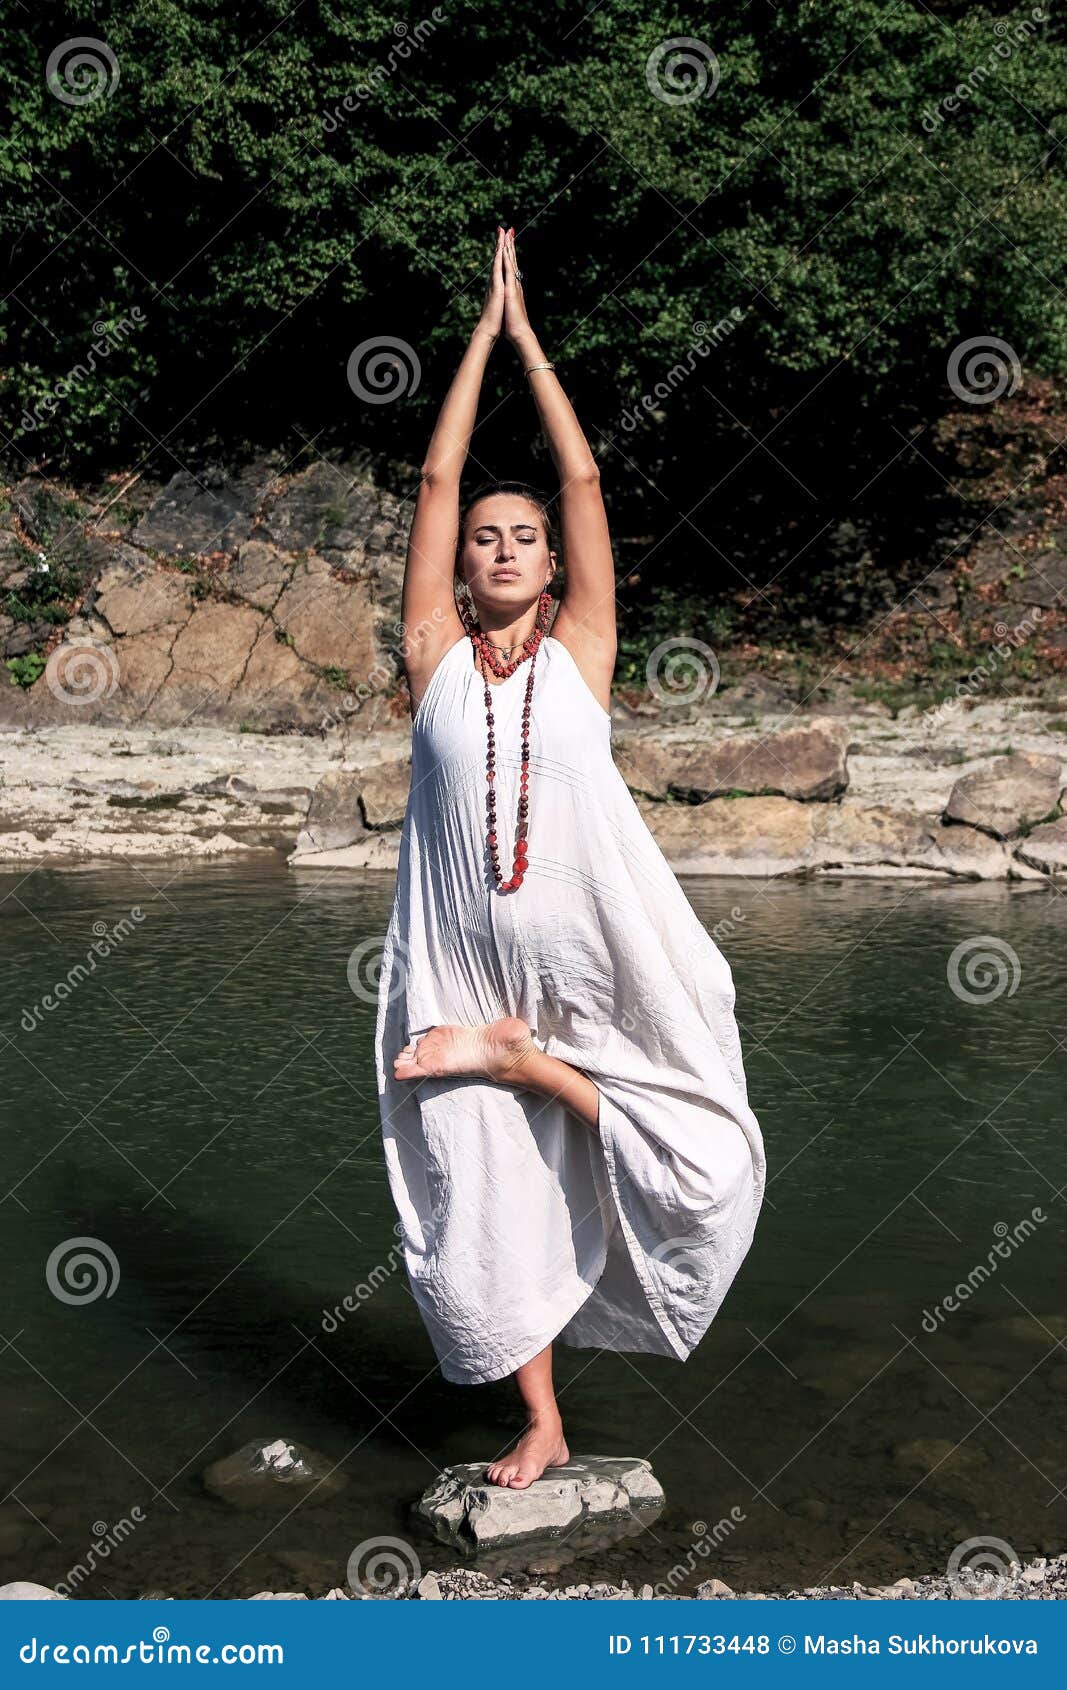 https://thumbs.dreamstime.com/z/beautiful-brunette-long-white-dress-young-woman-doing-yoga-mountains-exercises-standing-river-brown-haired-water-111733448.jpg